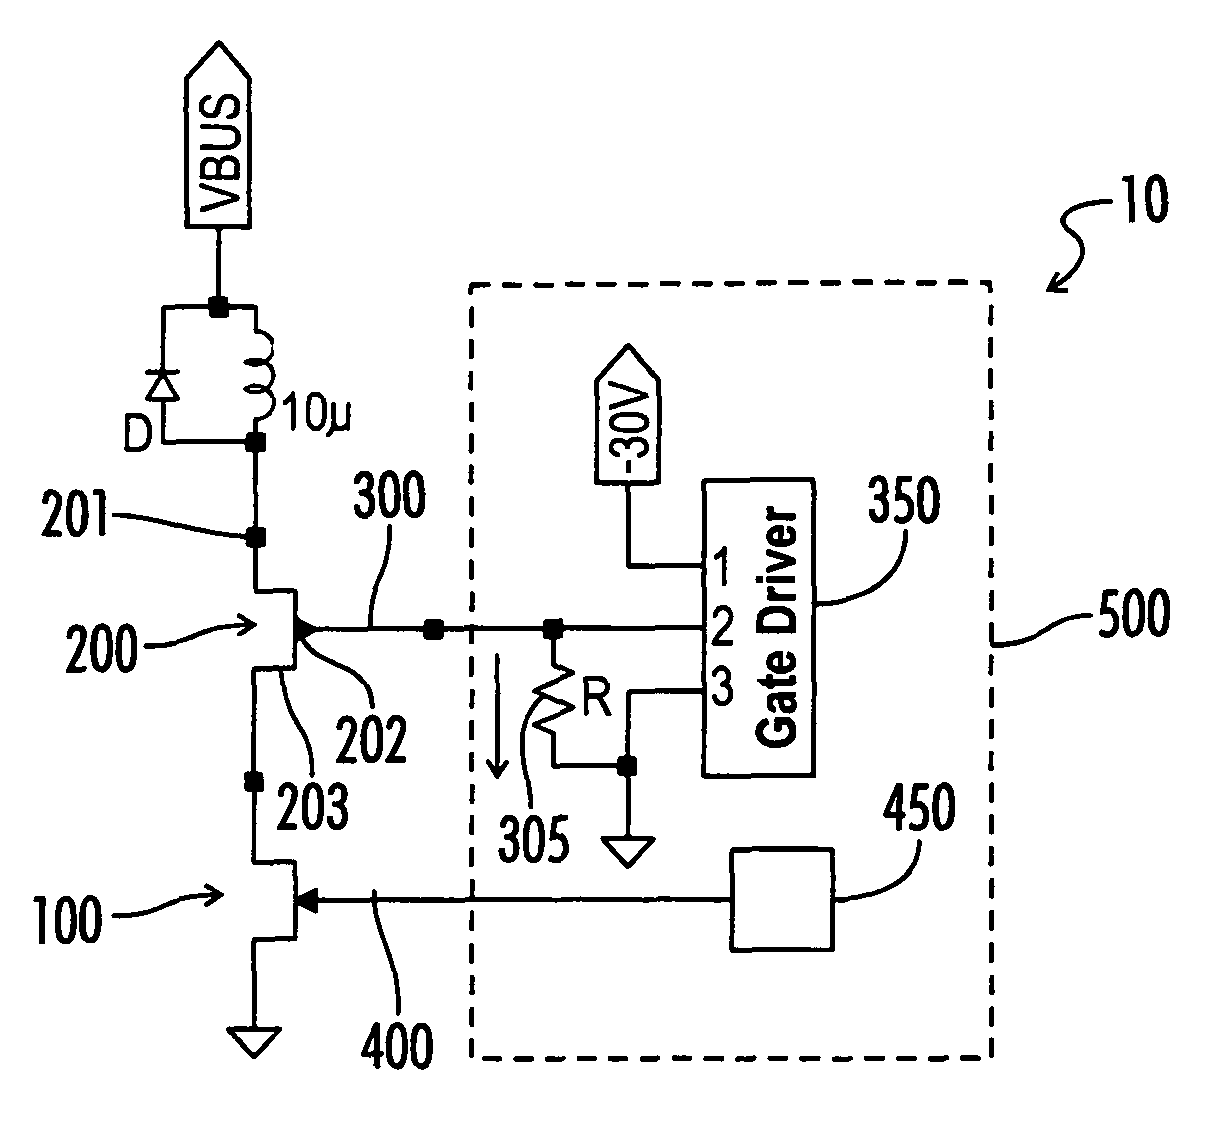 Normally-off D-mode driven direct drive cascode